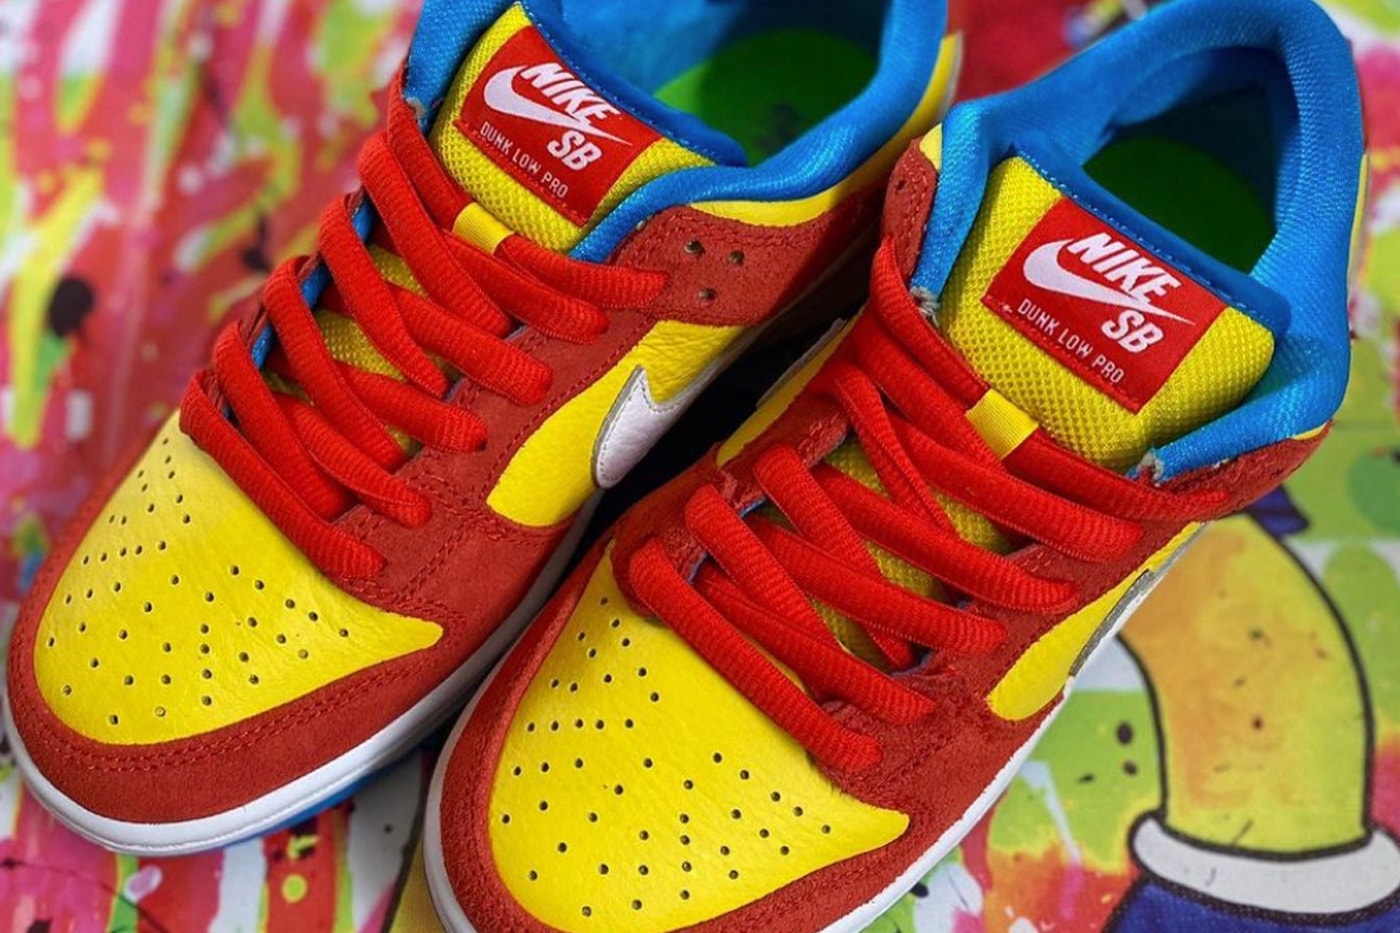 Closer Look Nike SB Dunk Low Pro Bart Simpson bq6817 602 april 1 release date price info habanero red yellow blue hero air zoom